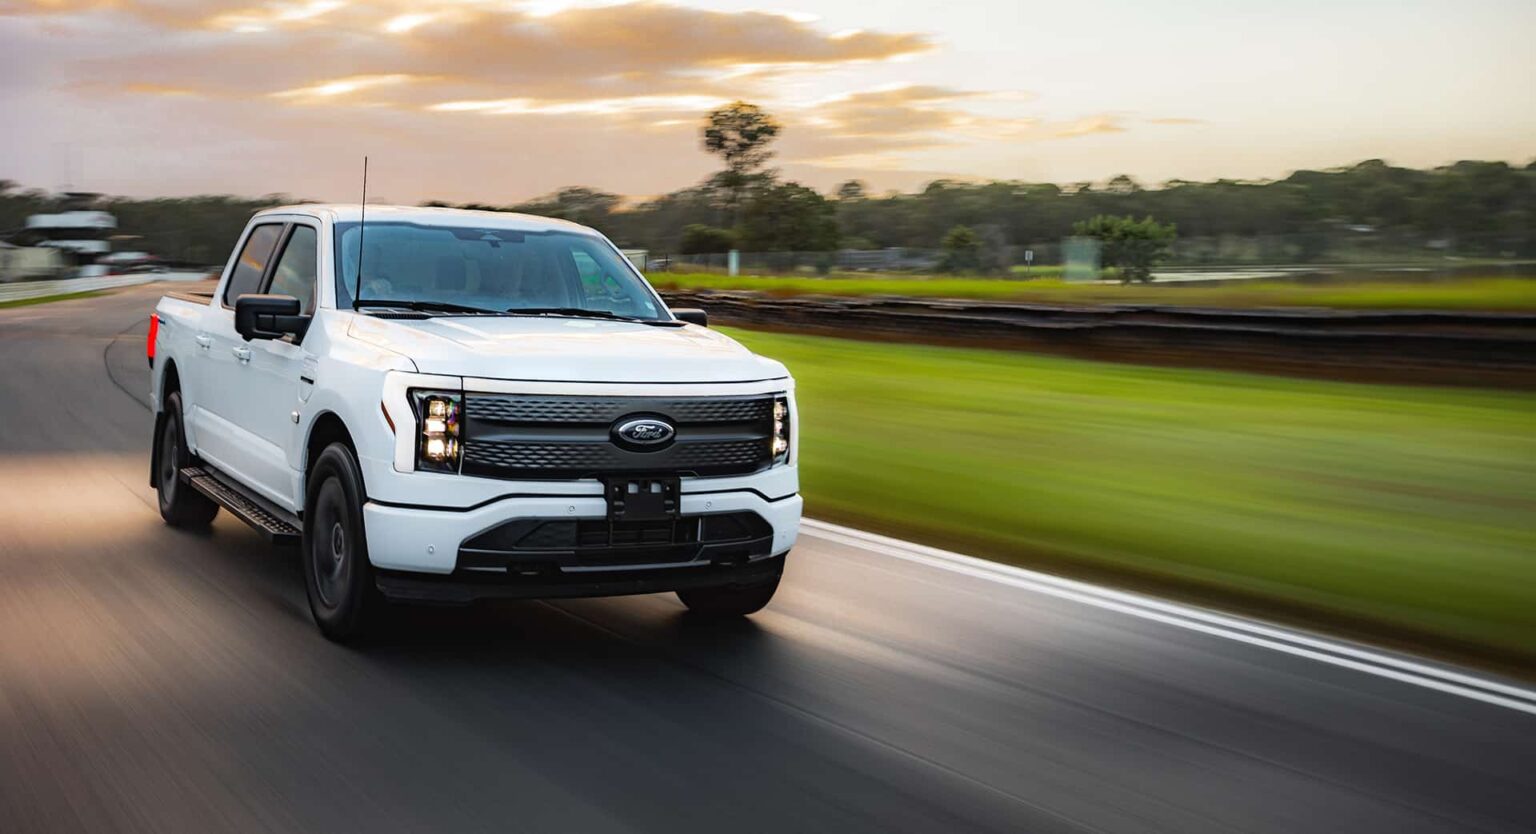 AUSEV - A white Ford F-150 Lightning electric pickup truck speeds along a smooth road with blurred greenery and a sunset sky in the background.